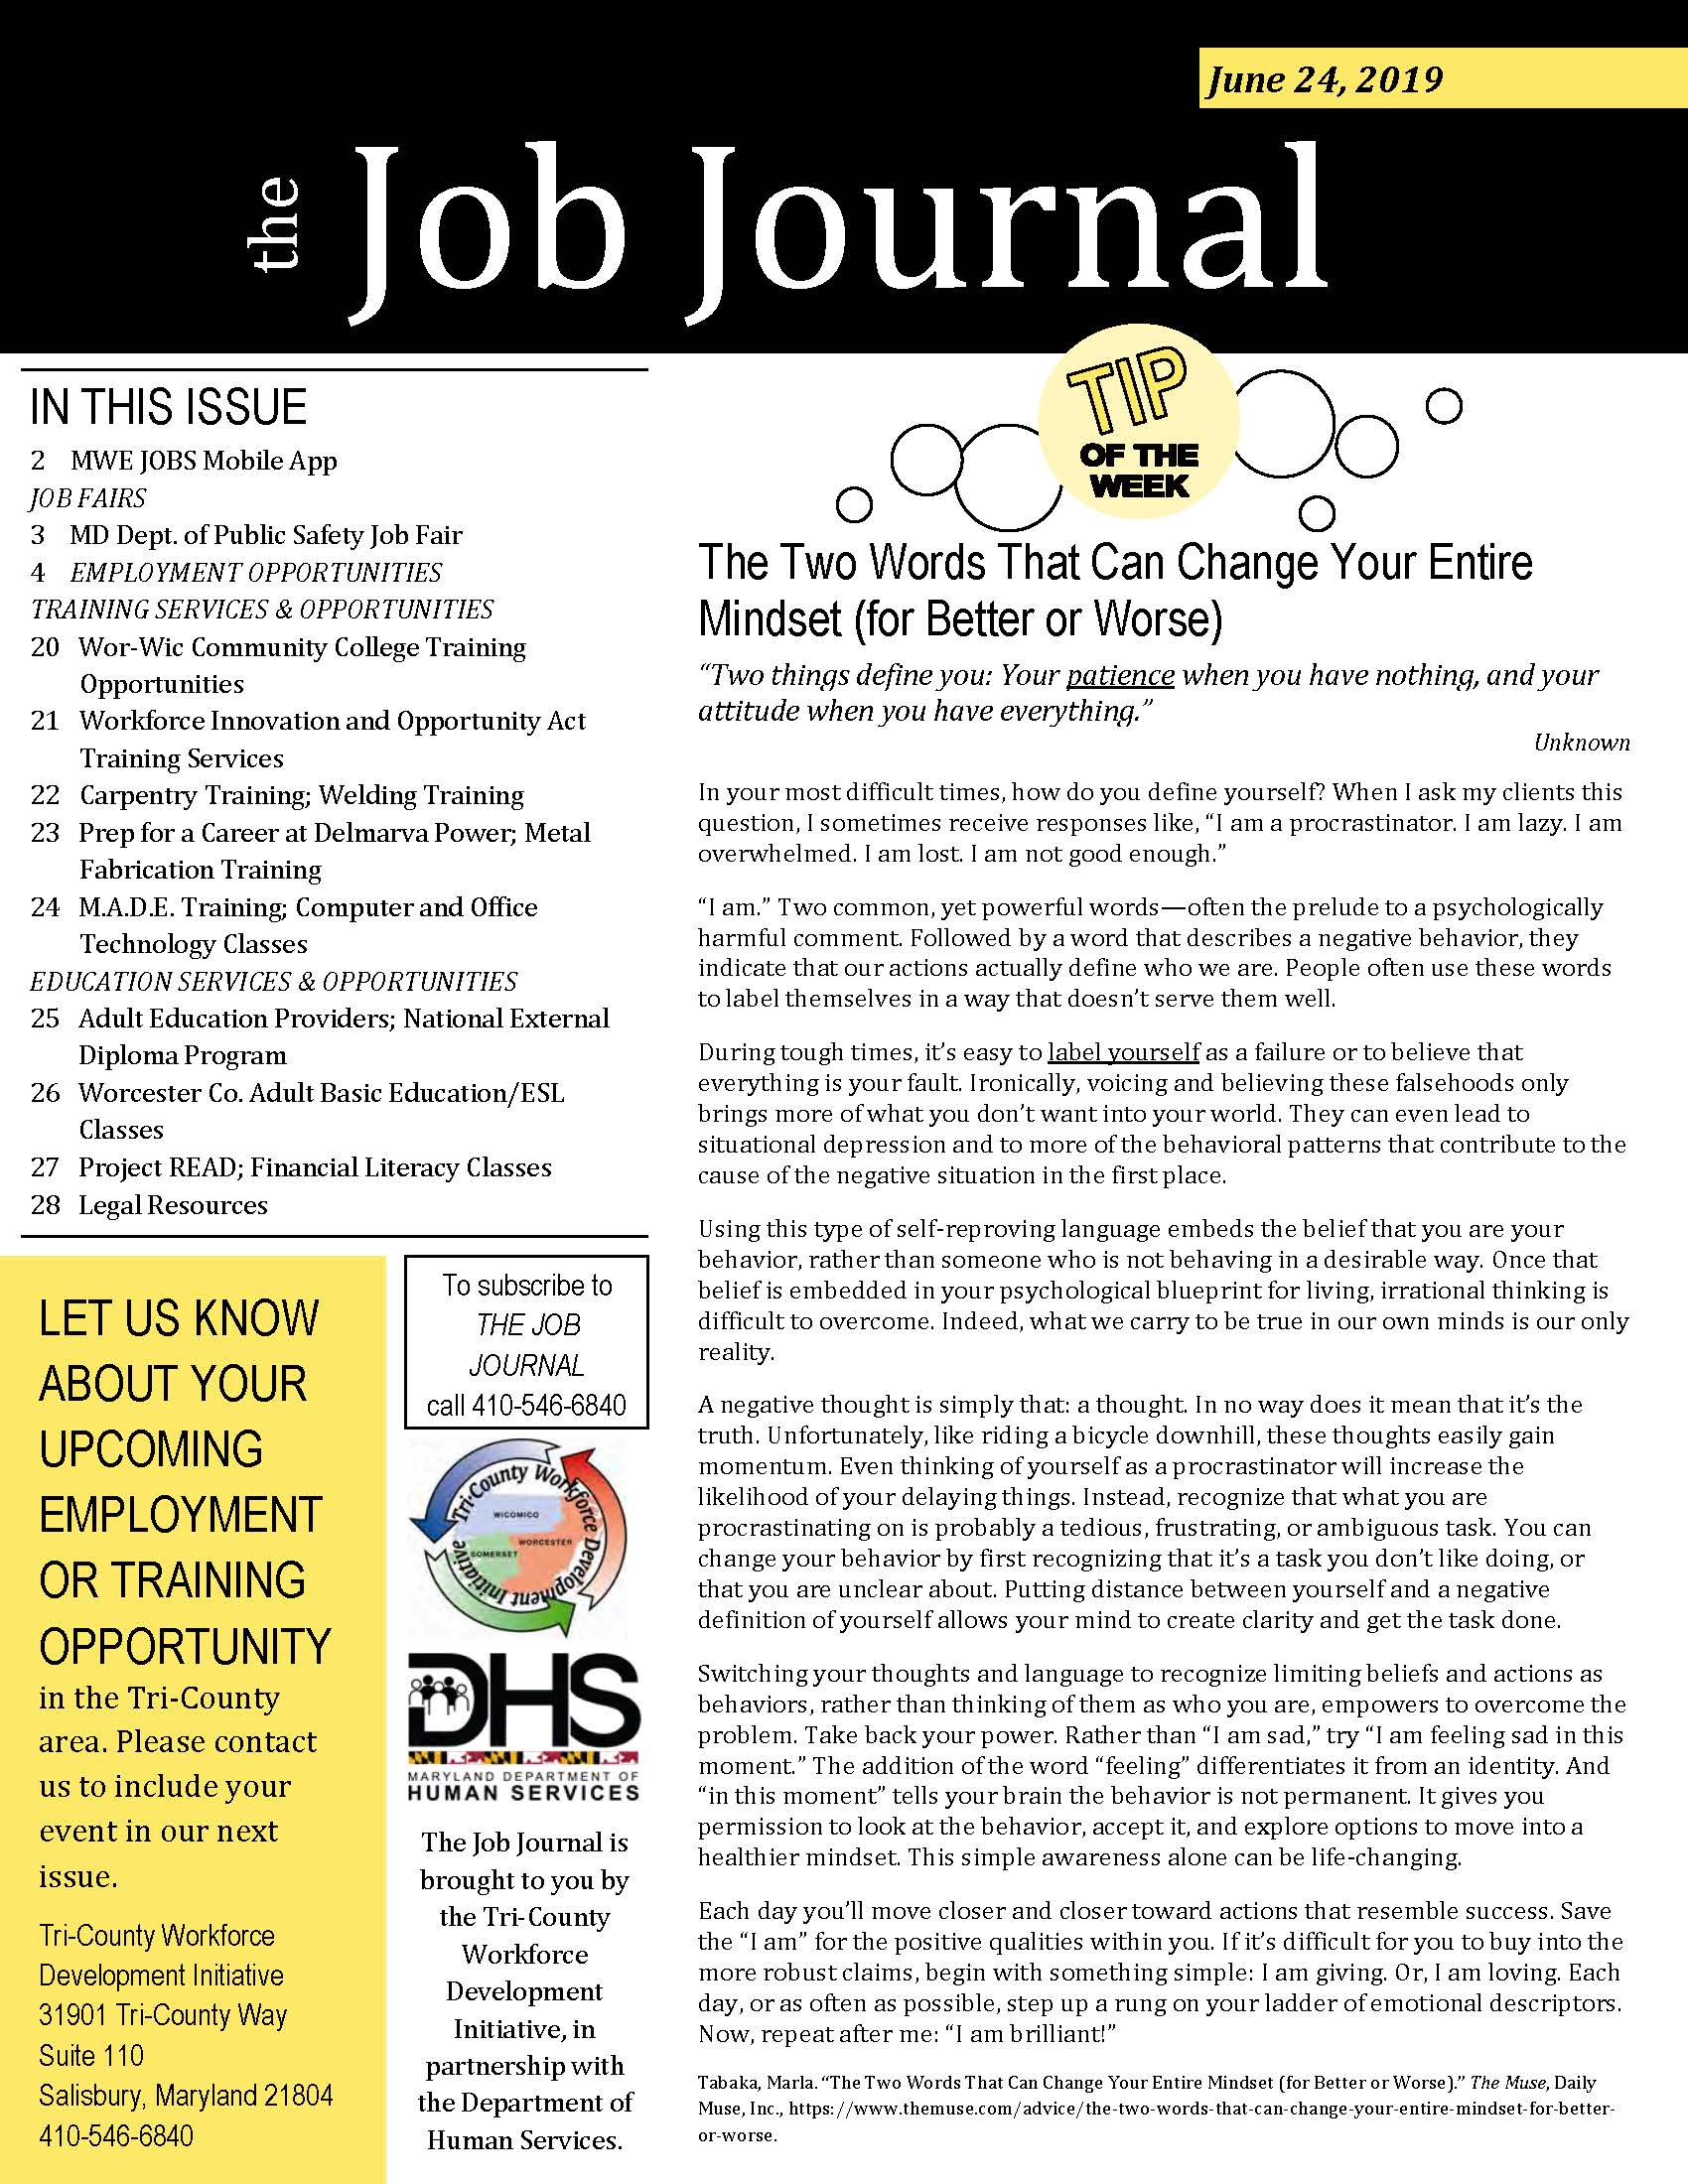 Cover page for the Job Journal 06.24.2019